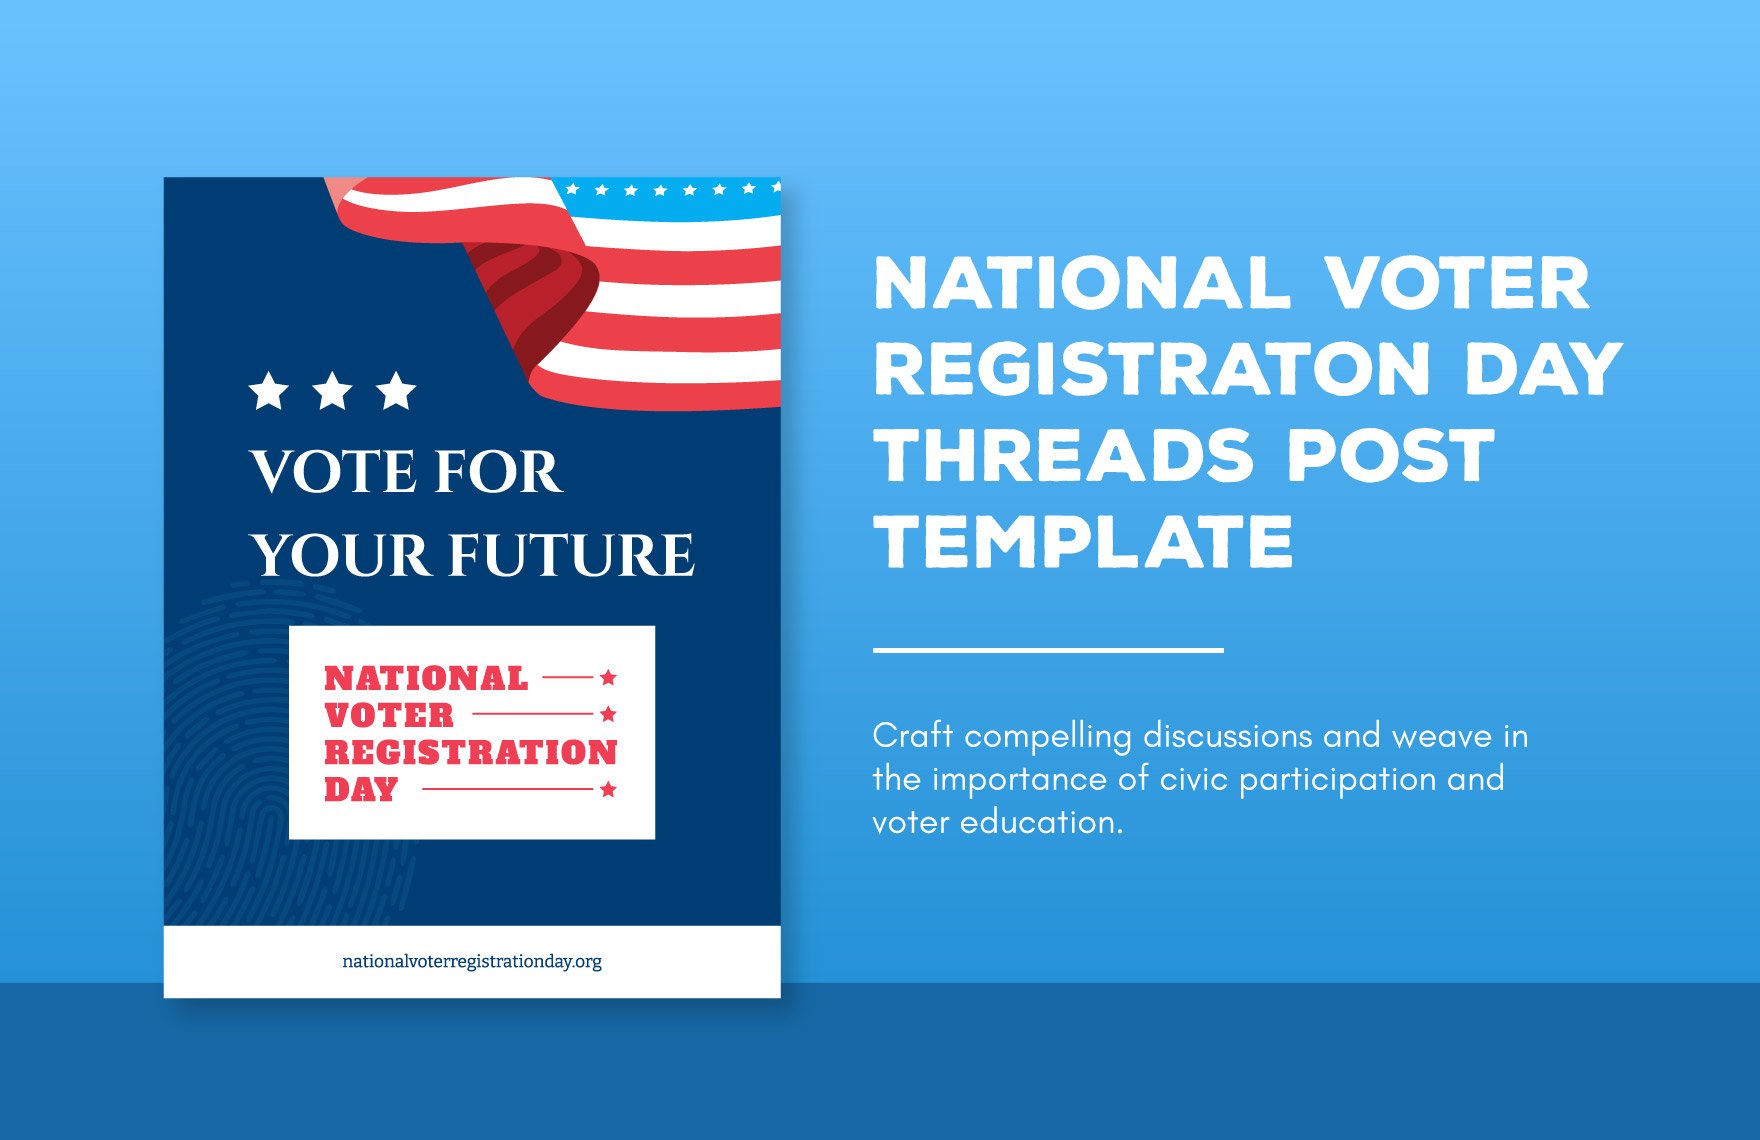 Free National Voter Registration Day Threads Post Template in Illustrator, PSD, PNG